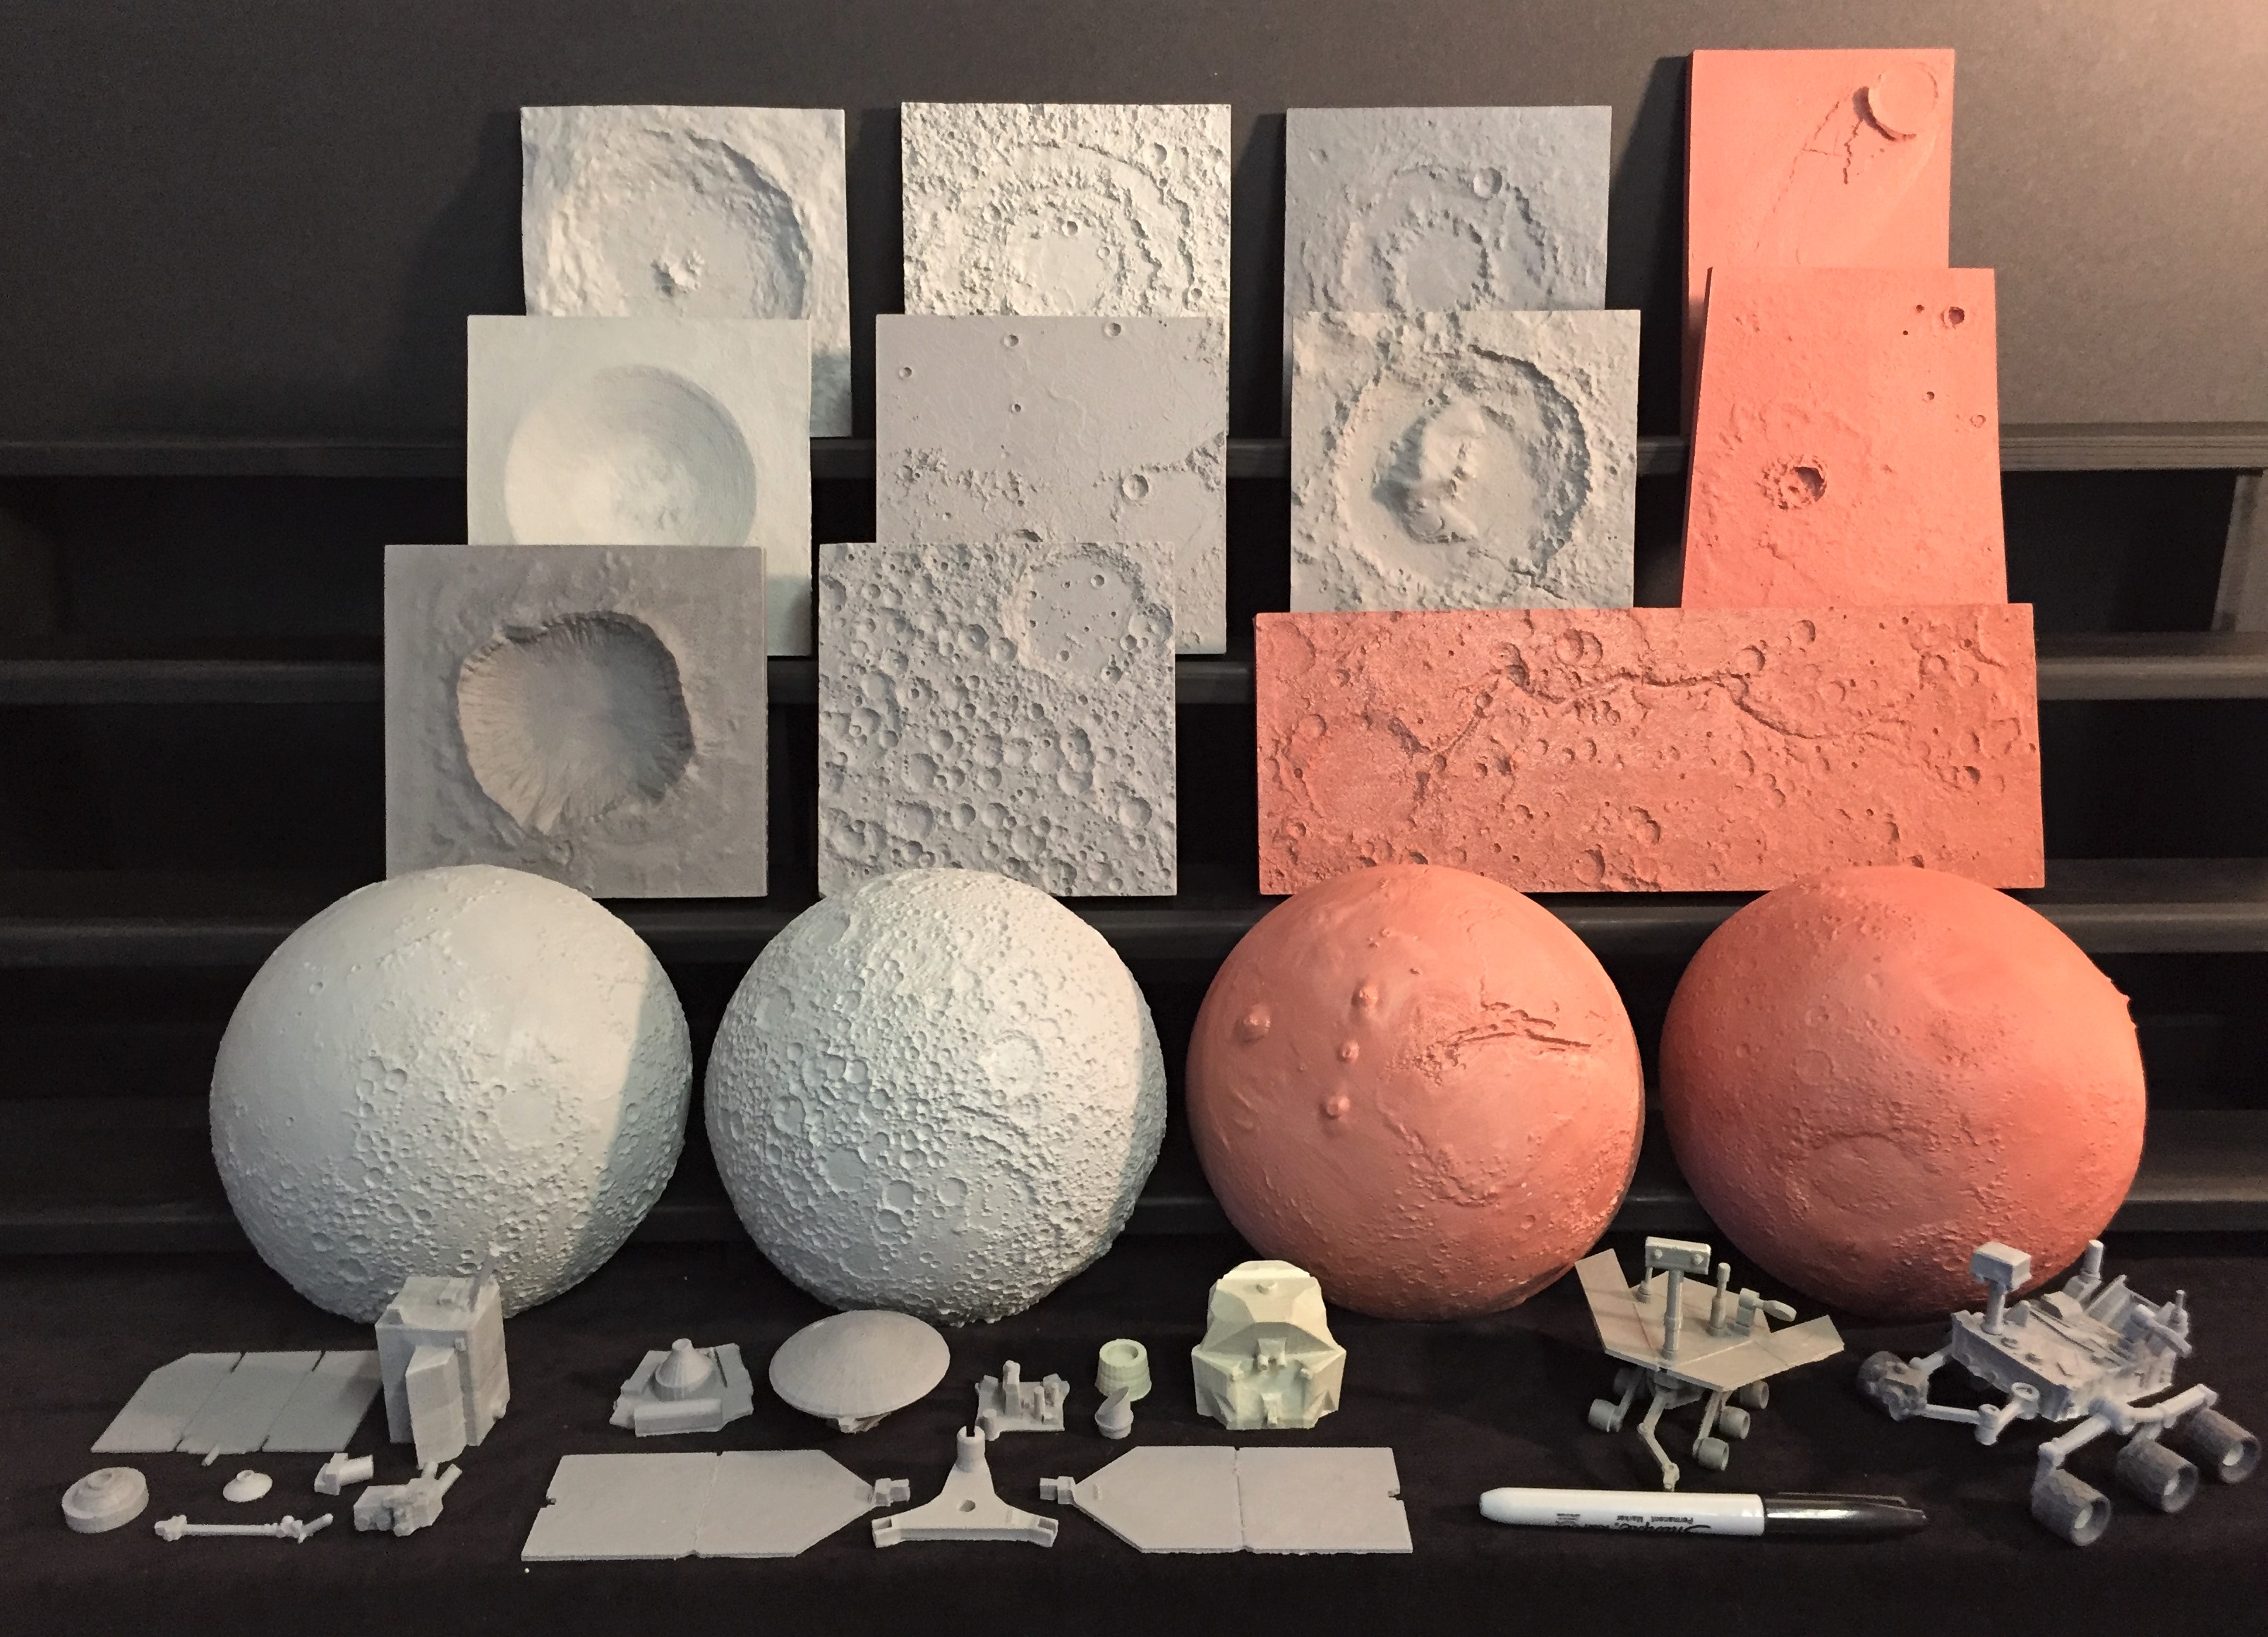 Monolithic 3D models ranging from an impact crater on Earth, five areas of terrain from the Moon, and five areas from Mars.  Hemispherical 3D models of the Moon and Mars are below the monoliths.  Foreground shows 4 different tactile spacecraft kits with Moon and Mars orbiter kits shown as individual pieces and two Mars rovers shown fully assembled.  In the image the two Mars rovers appear to be analyzing a sharpie marker in front of them.